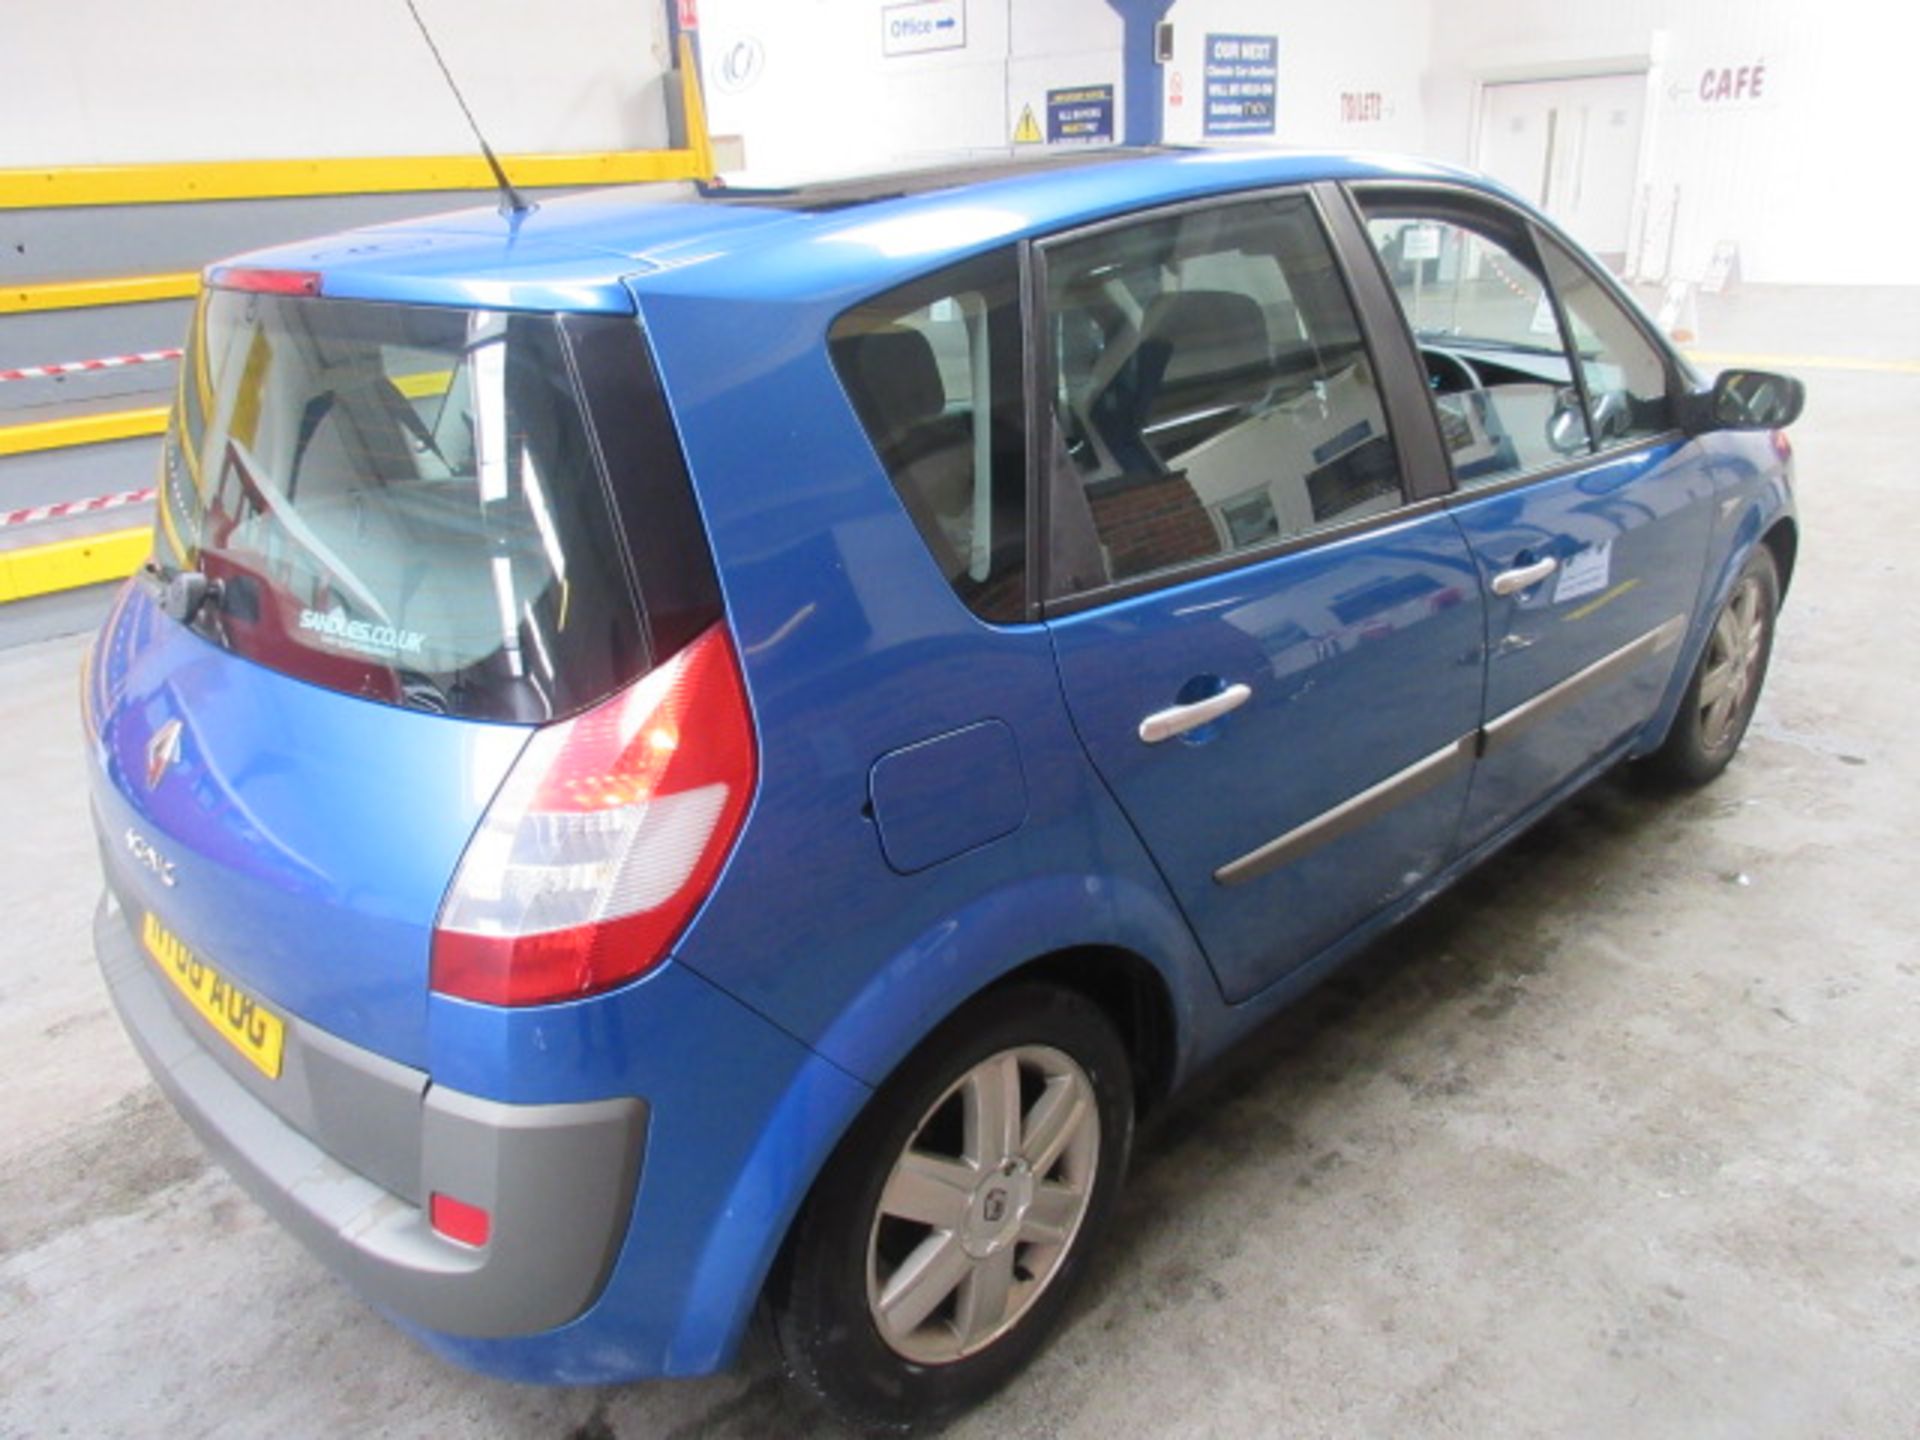 06 06 Renault Scenic Dynamique - Image 2 of 9